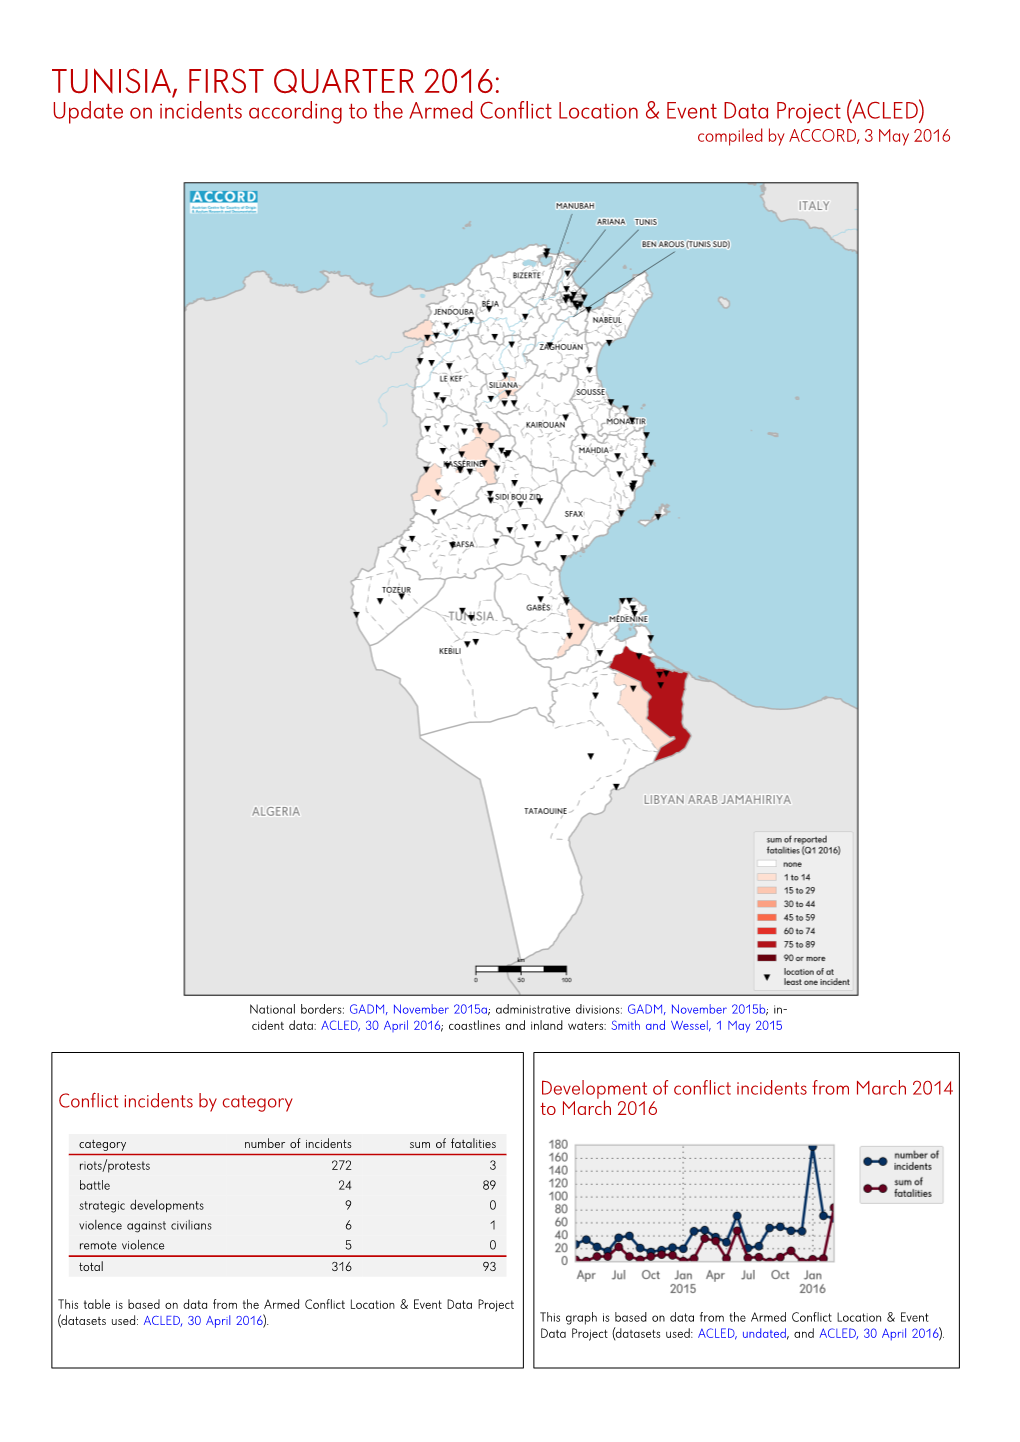 TUNISIA, FIRST QUARTER 2016: Update on Incidents According to the Armed Conflict Location & Event Data Project (ACLED) Compiled by ACCORD, 3 May 2016